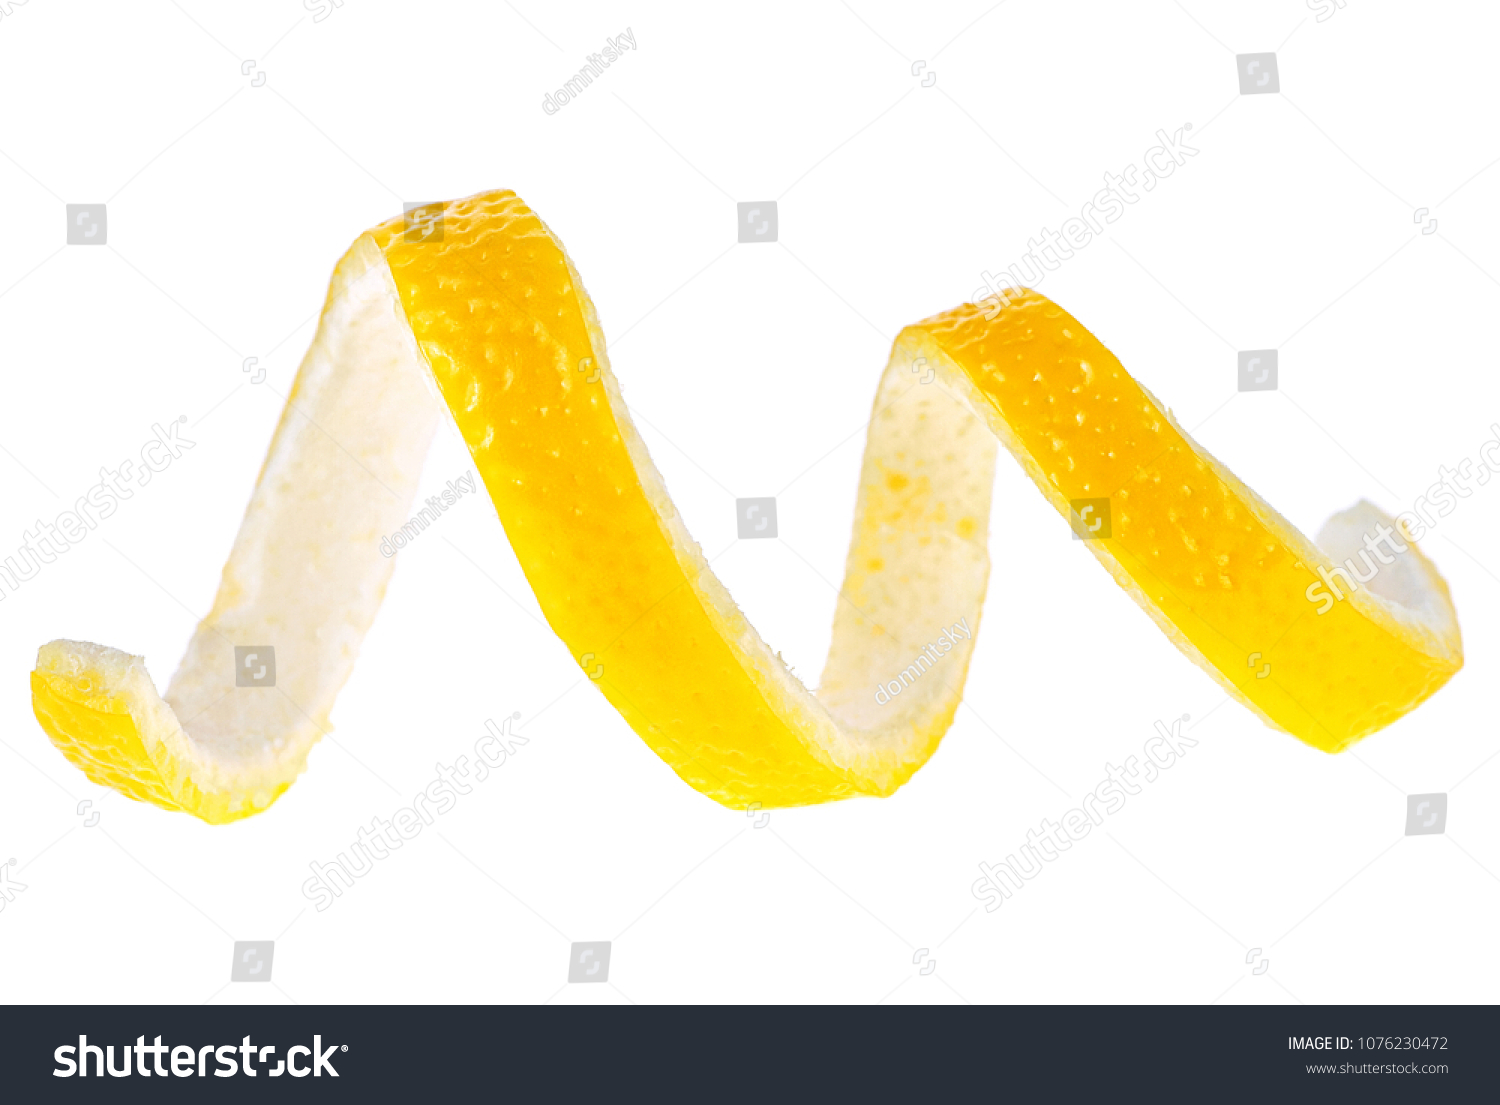 Lemon peel isolated on a white background. Healthy food. #1076230472